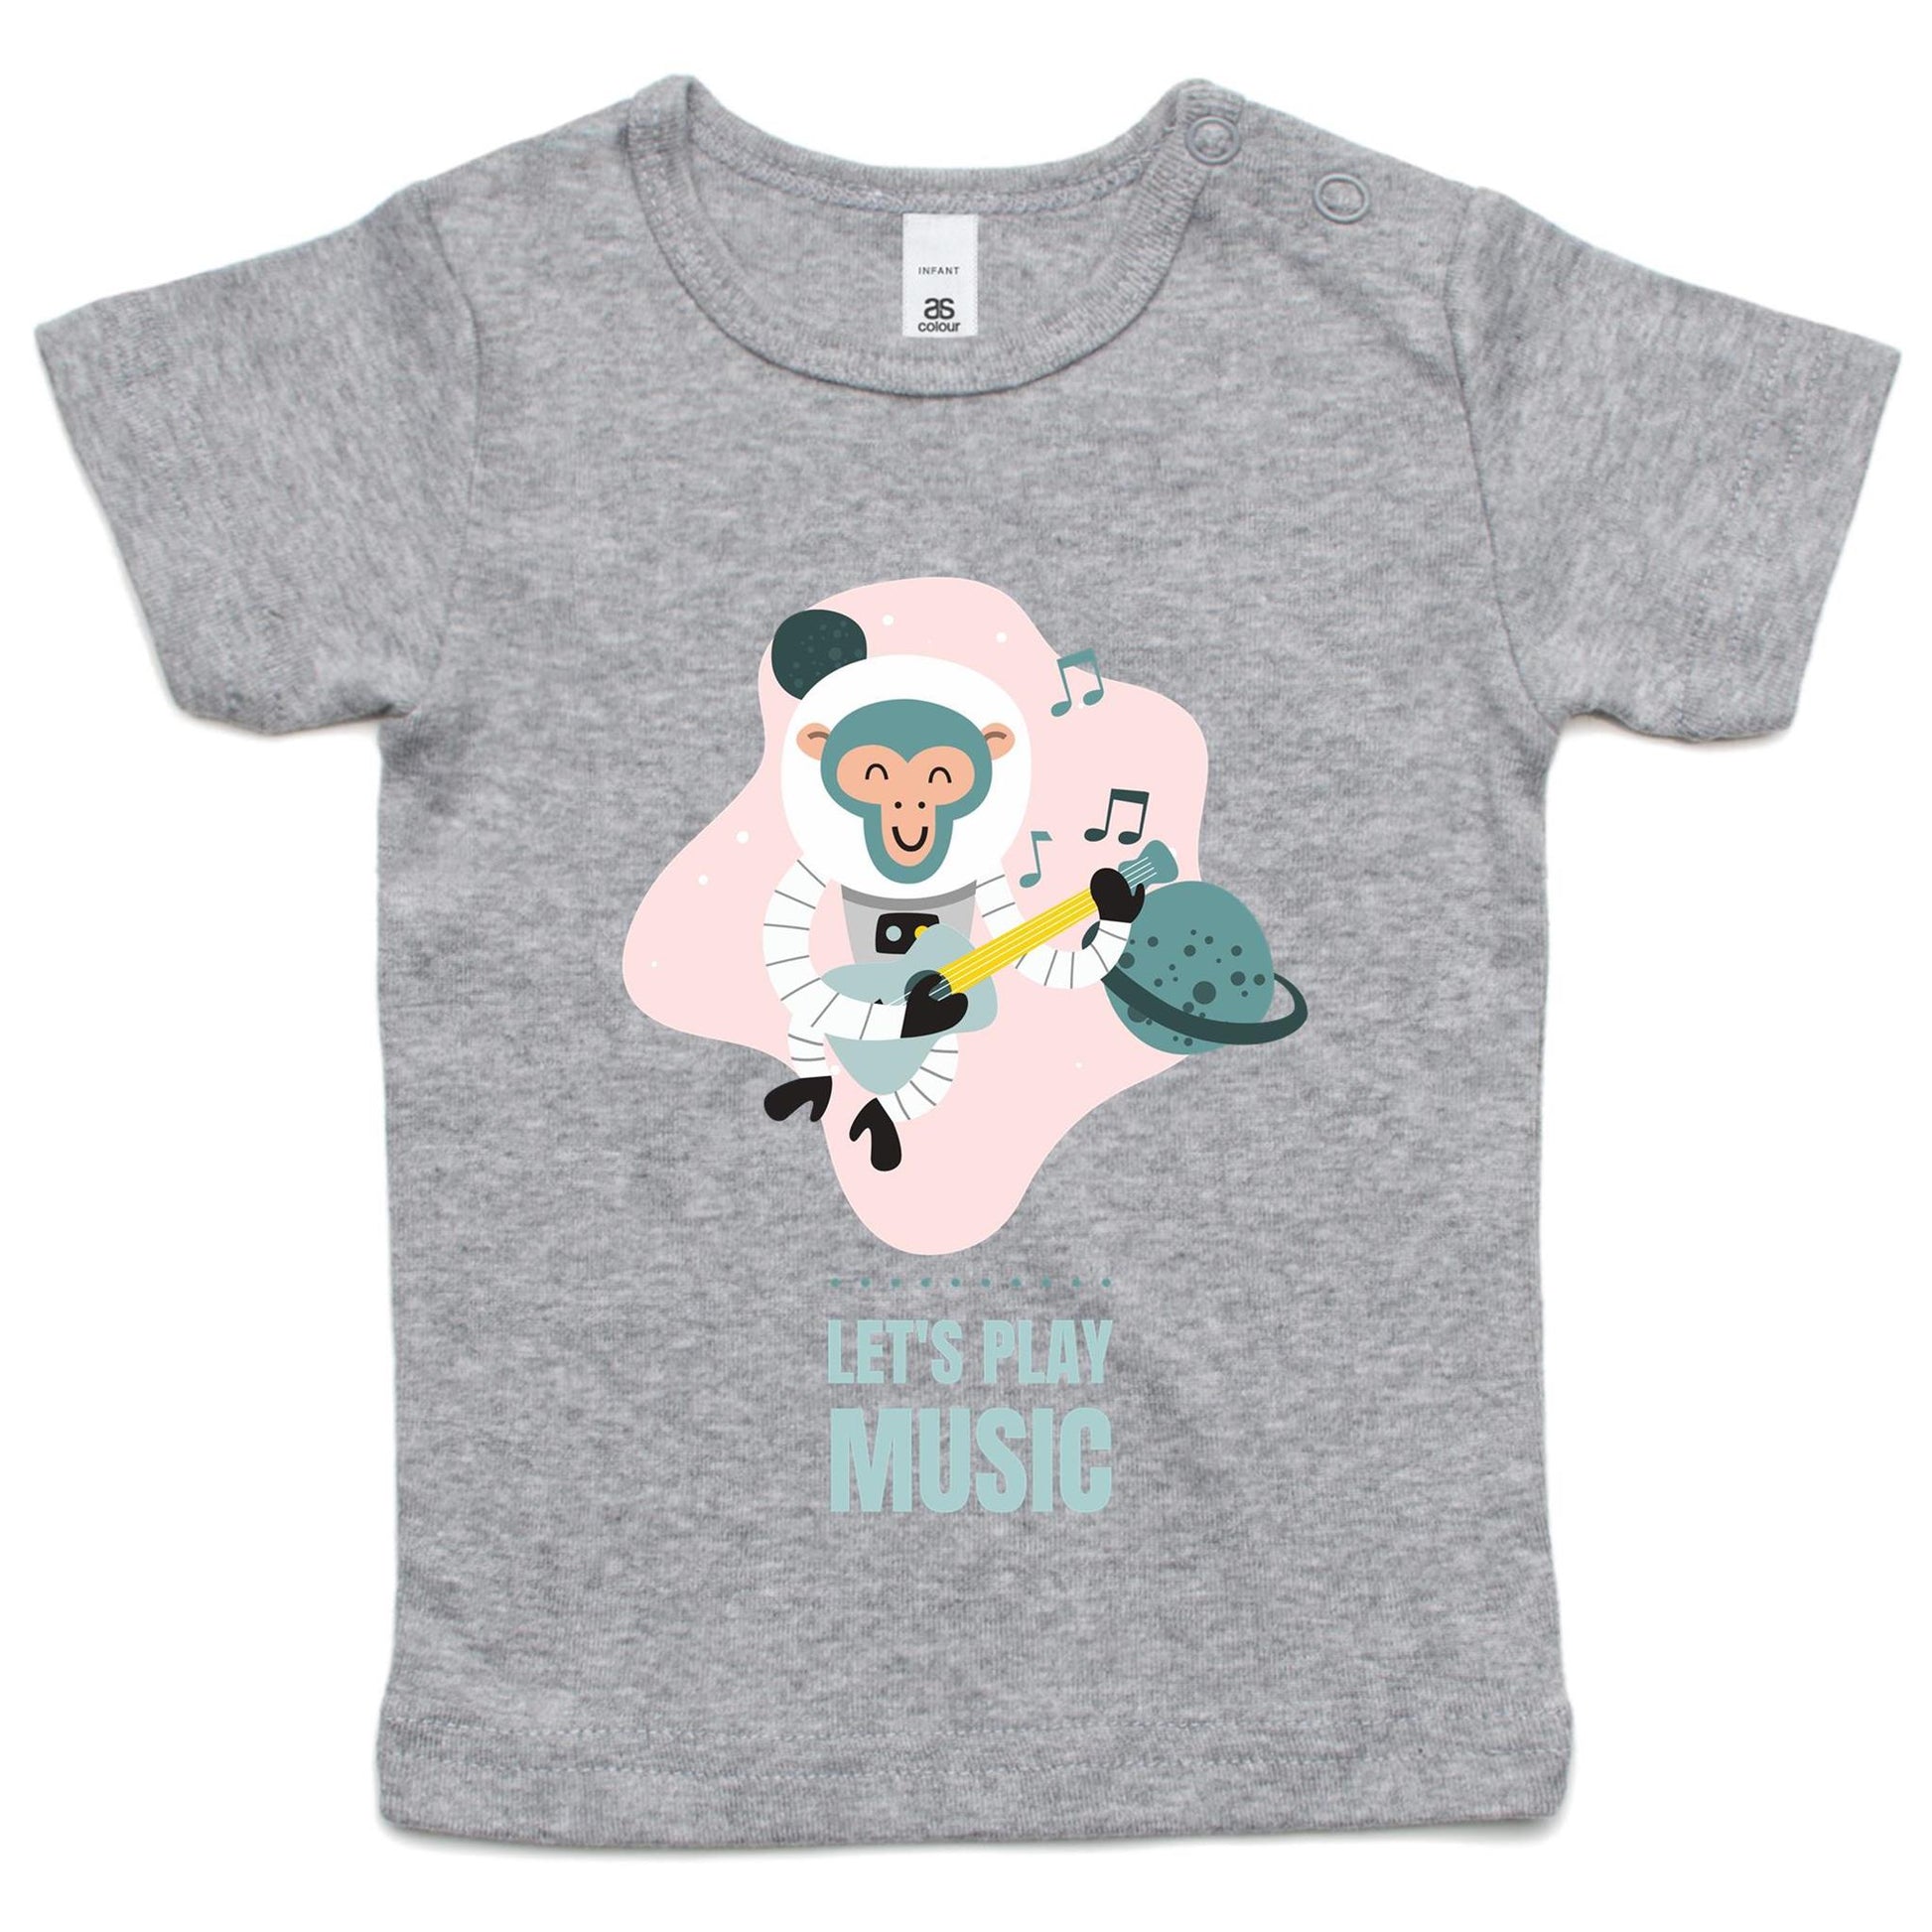 Let's Play Music - Baby T-shirt Grey Marle Baby T-shirt animal Dad Music Space